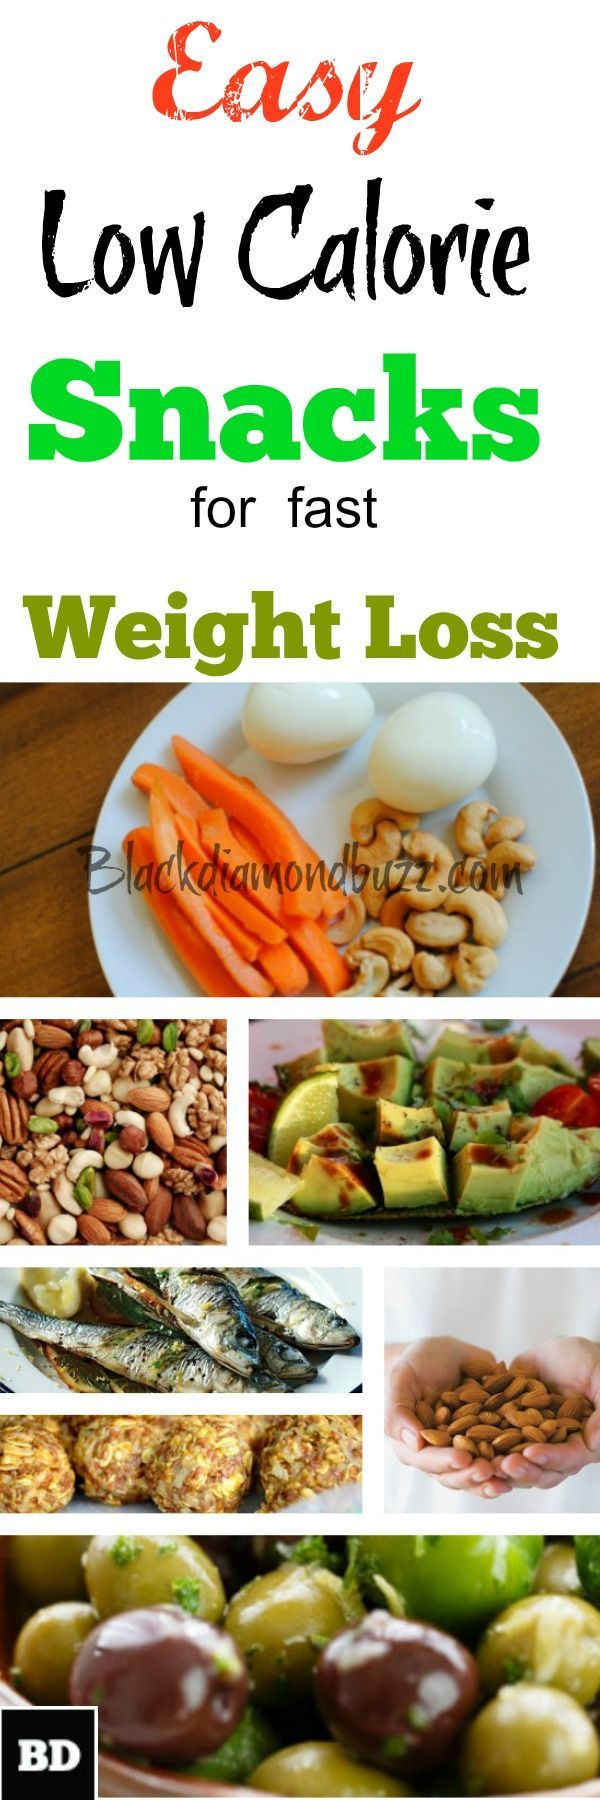 Healthy Low Fat Recipes For Weight Loss
 Best 25 Weight loss snacks ideas on Pinterest